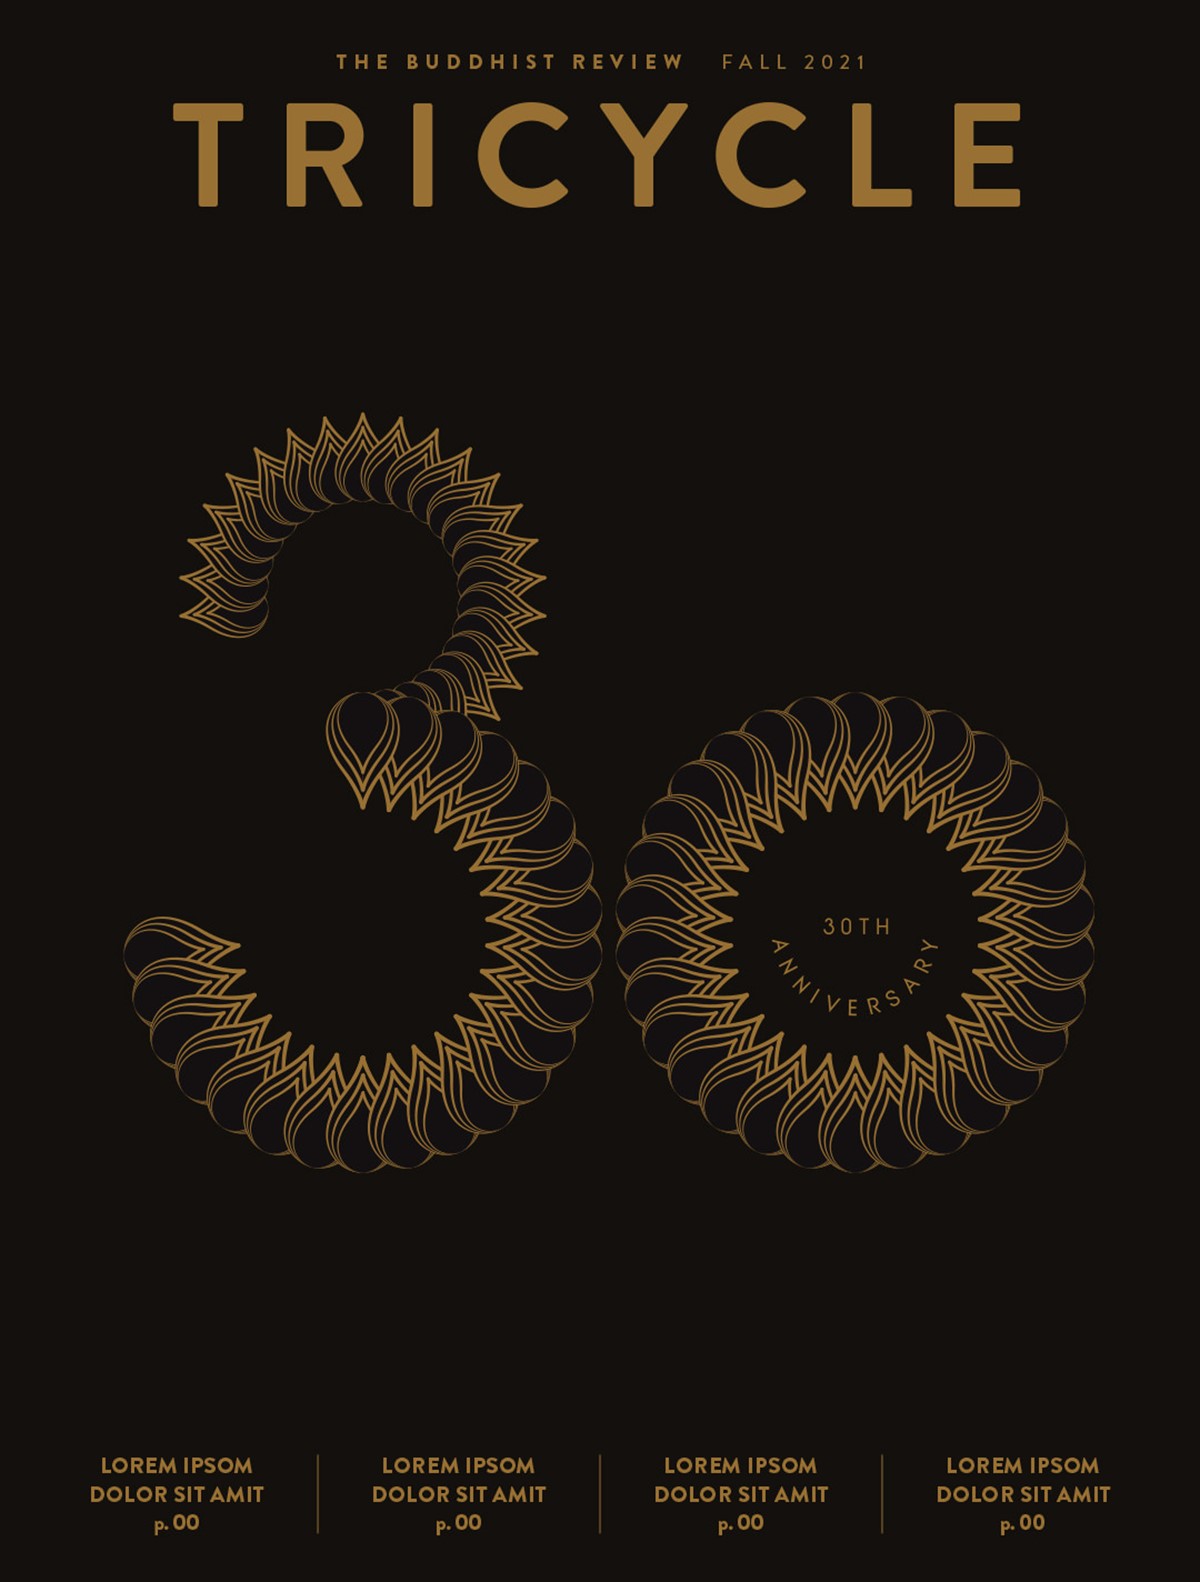 Tricycle magazine. 30th anniversary unused lotus flower cover design by Superfried.